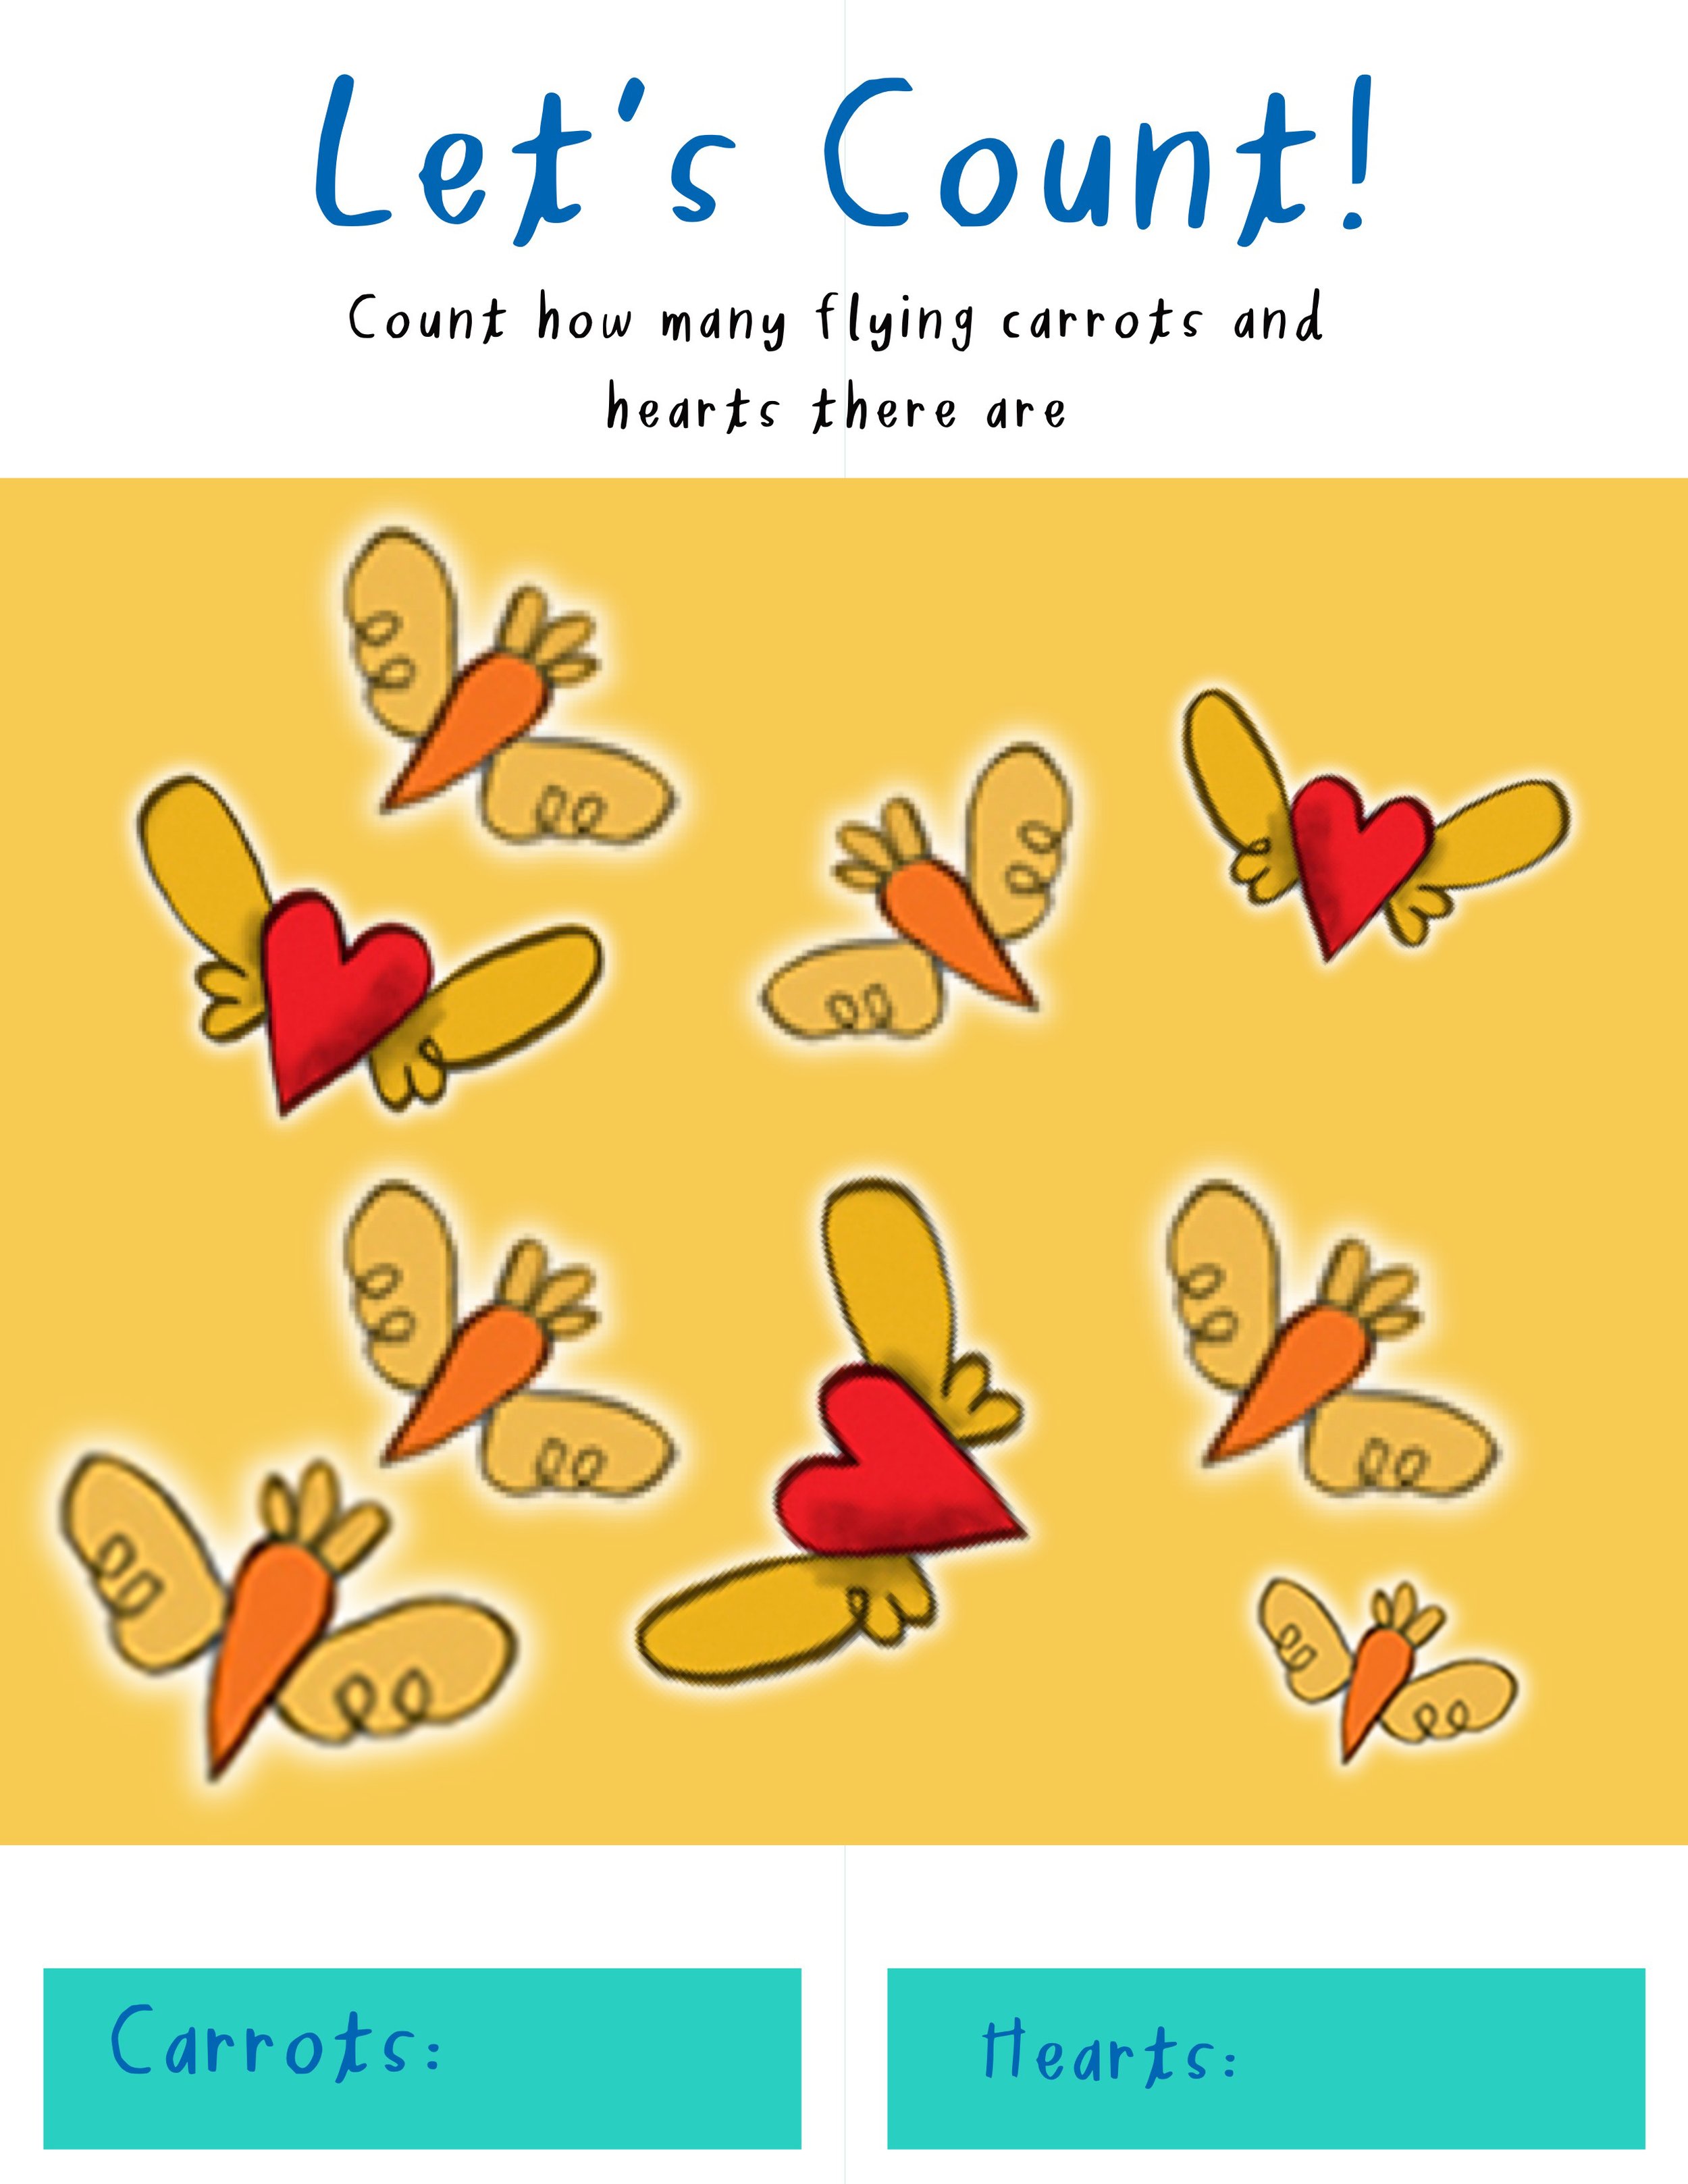 Let's Count: Flying Hearts and Carrots